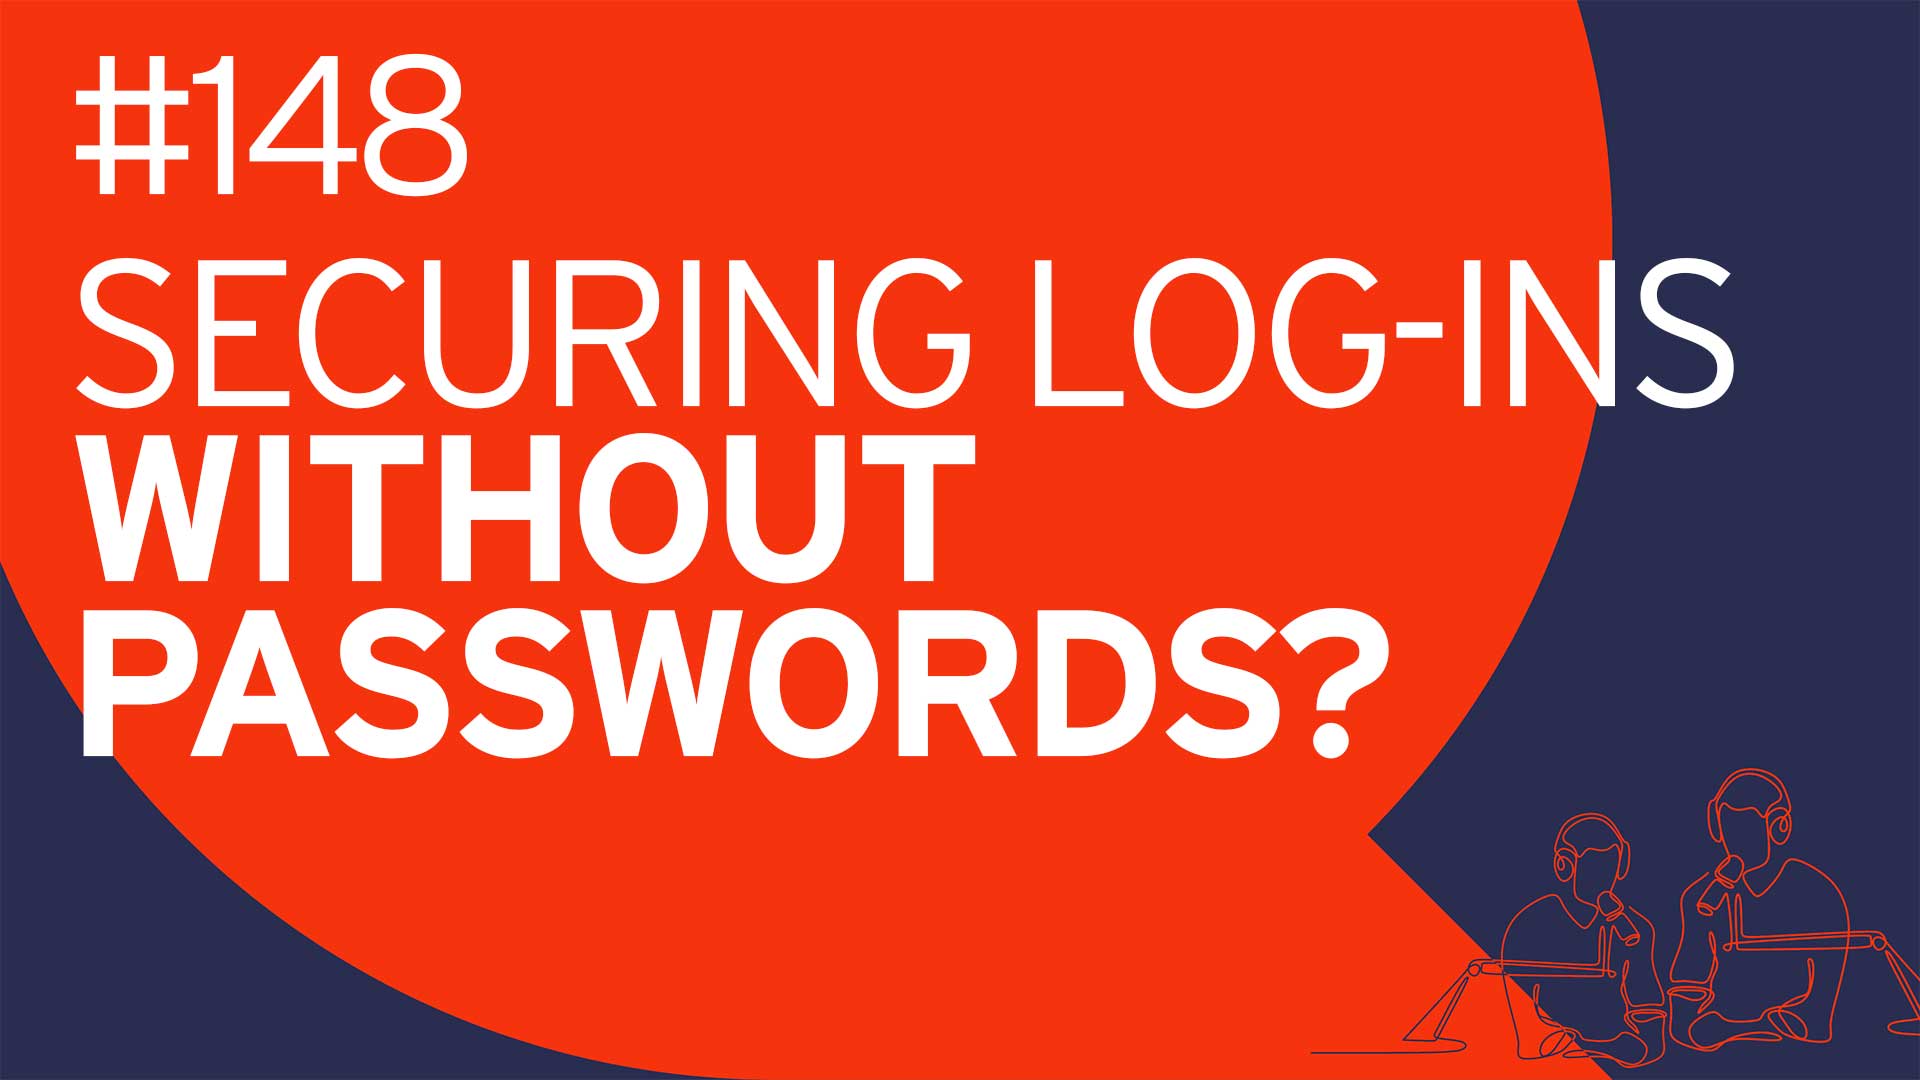 Analyst Chat #148: How to Improve Security with Passwordless Authentication